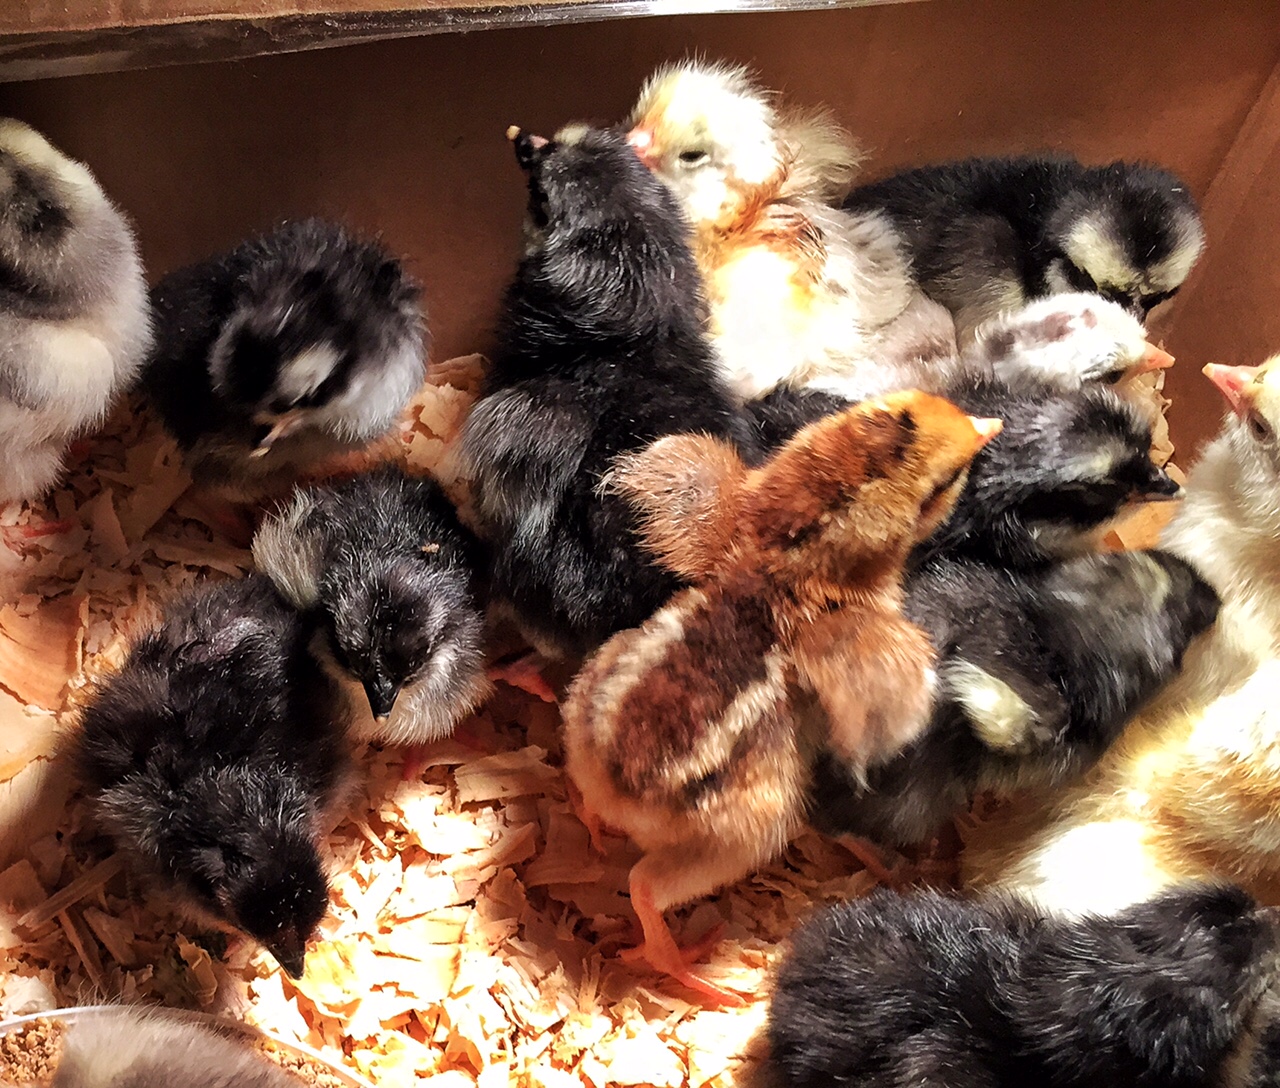 More chicks born after hatching on the farm. (WTOP/Kate Ryan)